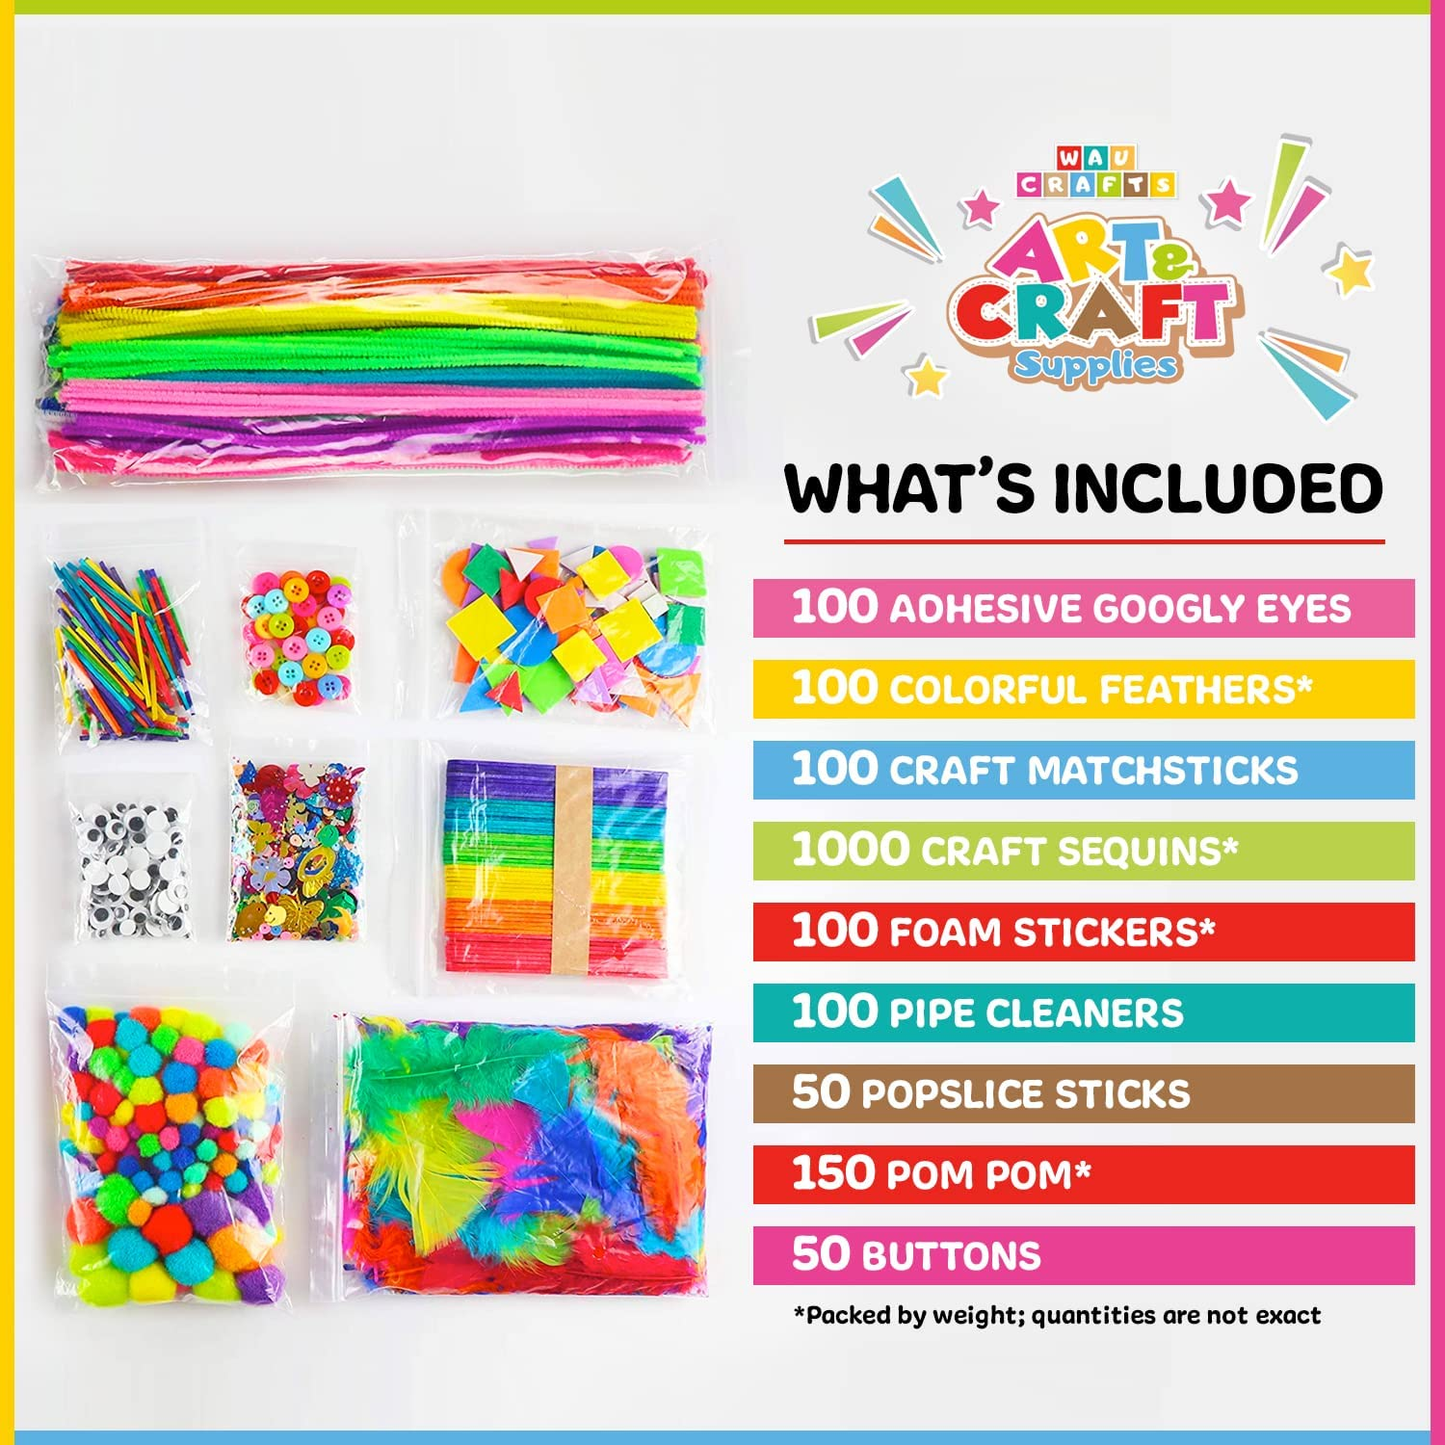 Crafts Arts and Crafts Supplies for Kids - 1750 Pcs Crafting for School Kindergarten Homeschool - Supplies Set for Kids Craft Art - Supply Kit for Toddlers and Kids Age 2 3 4 5 6 7 8 9